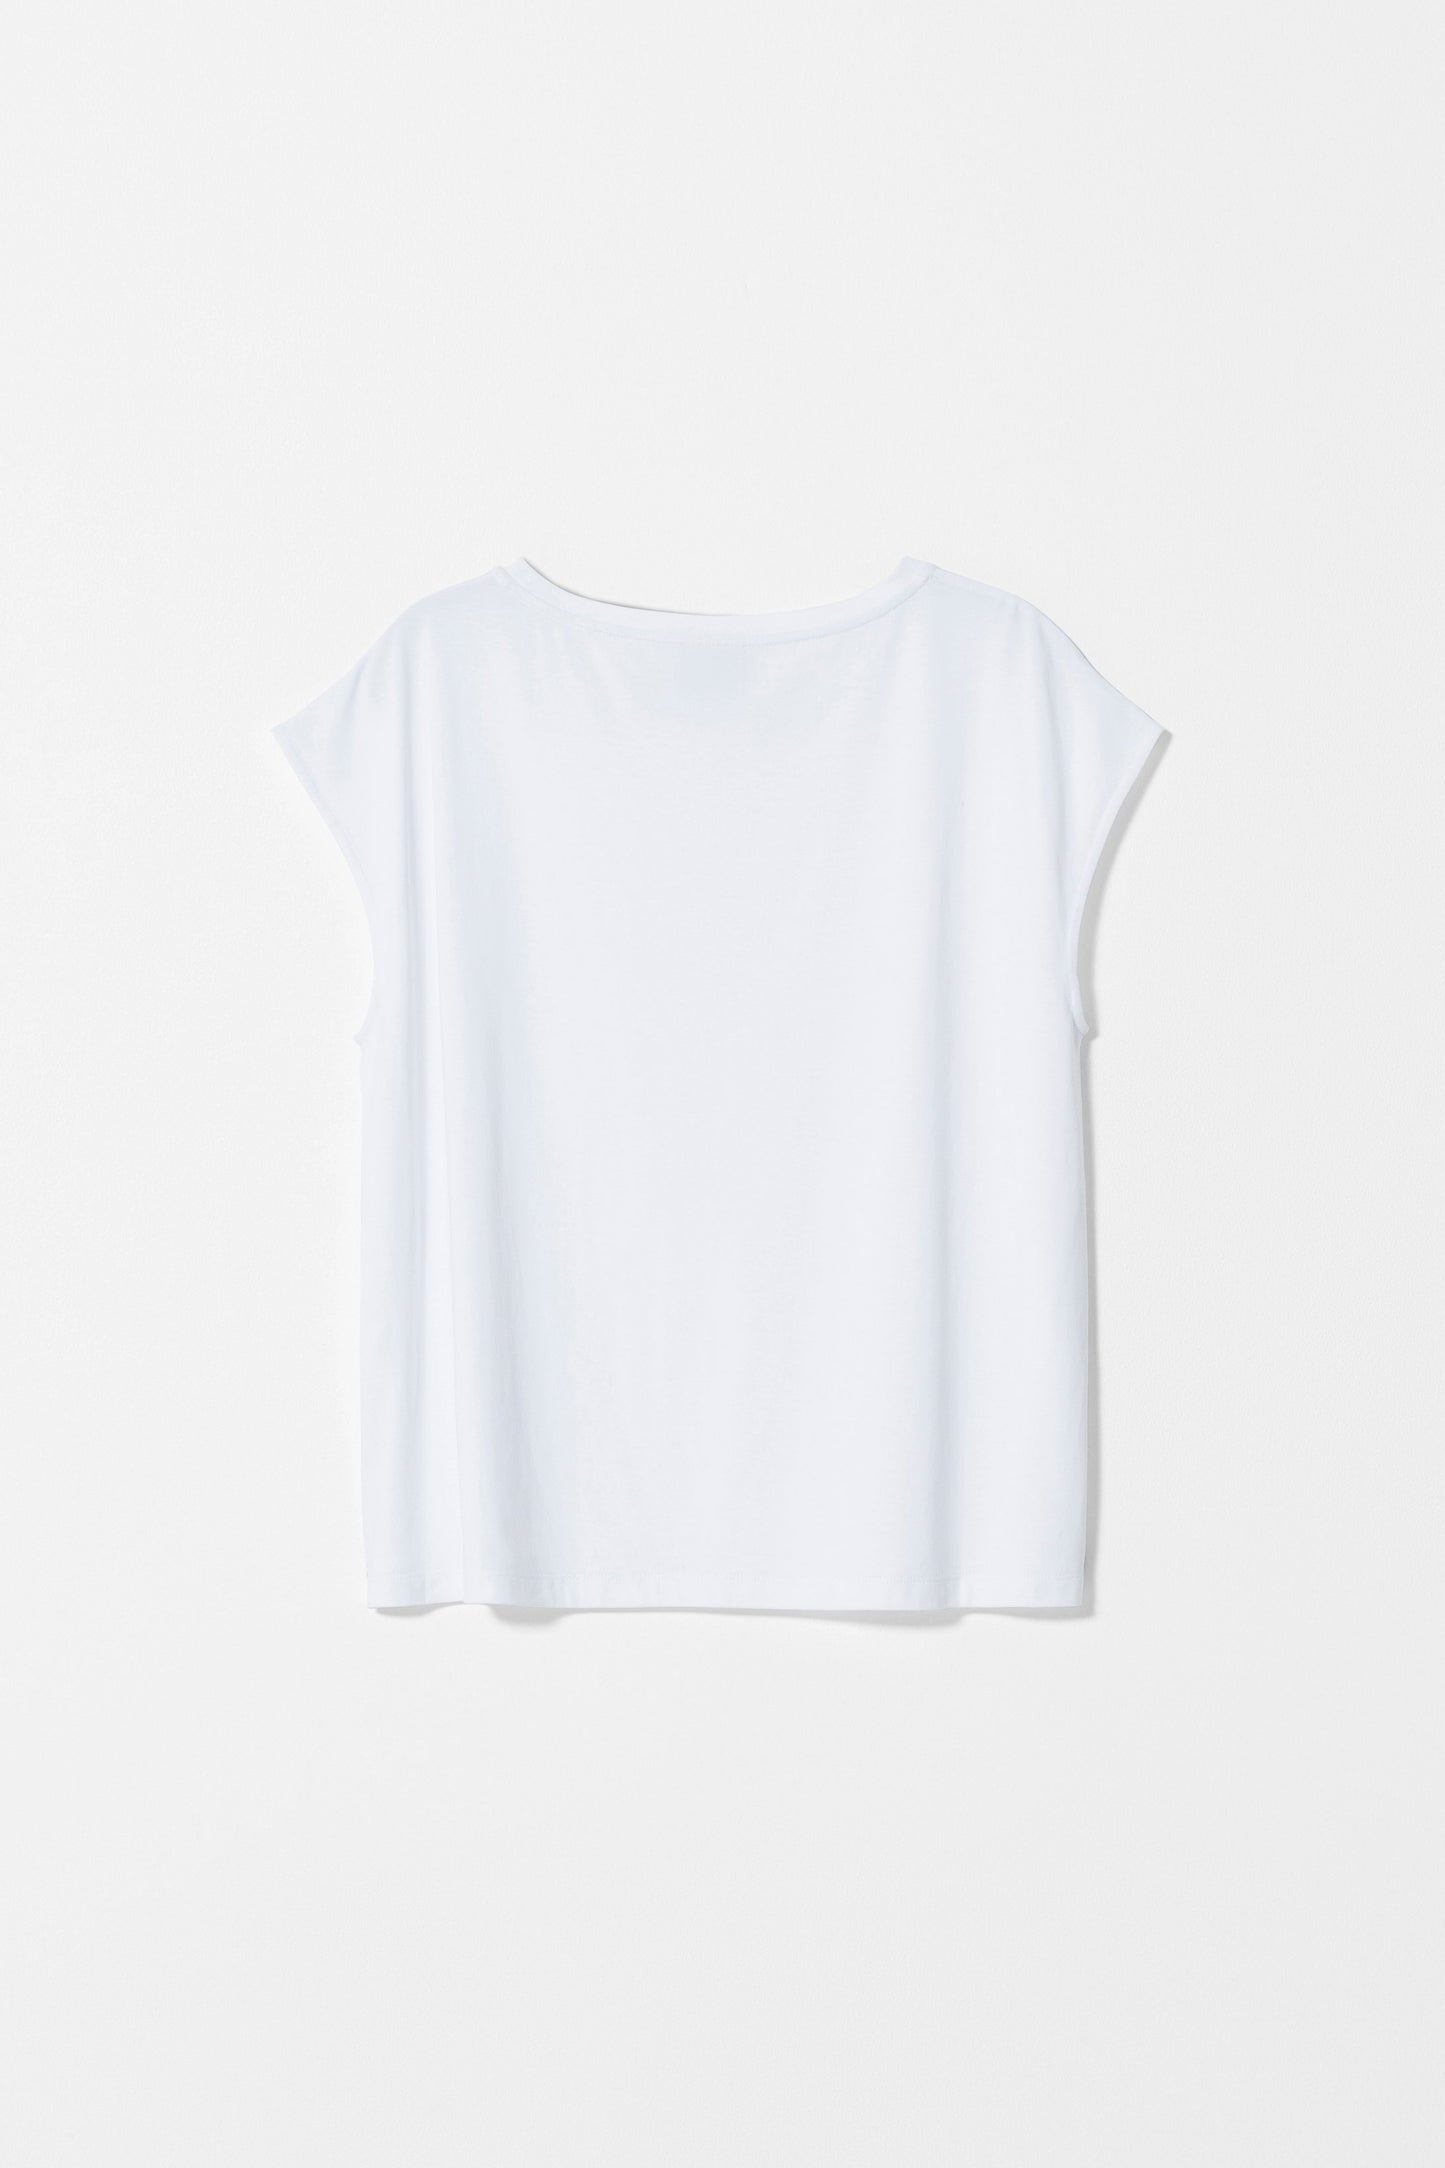 Oue Lightweight A-Line Tee Back | White